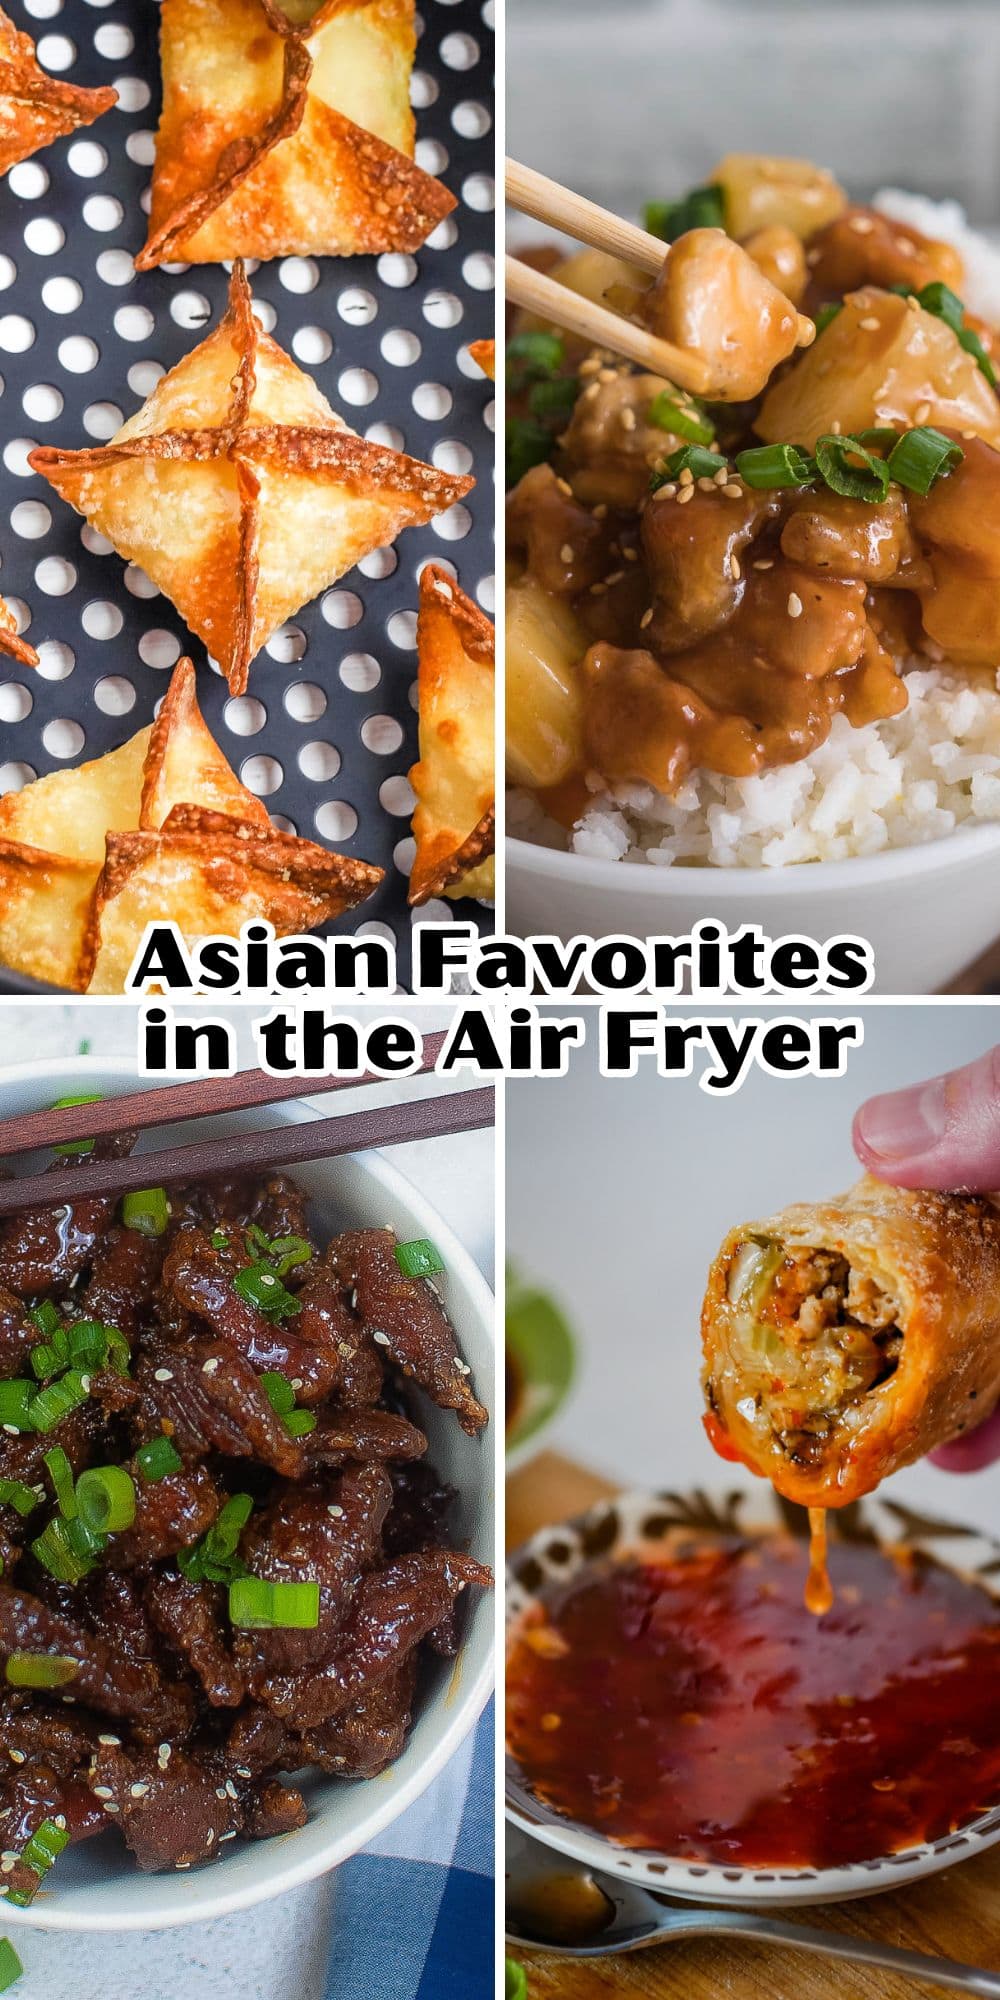 Asian favorites in the air fryer.